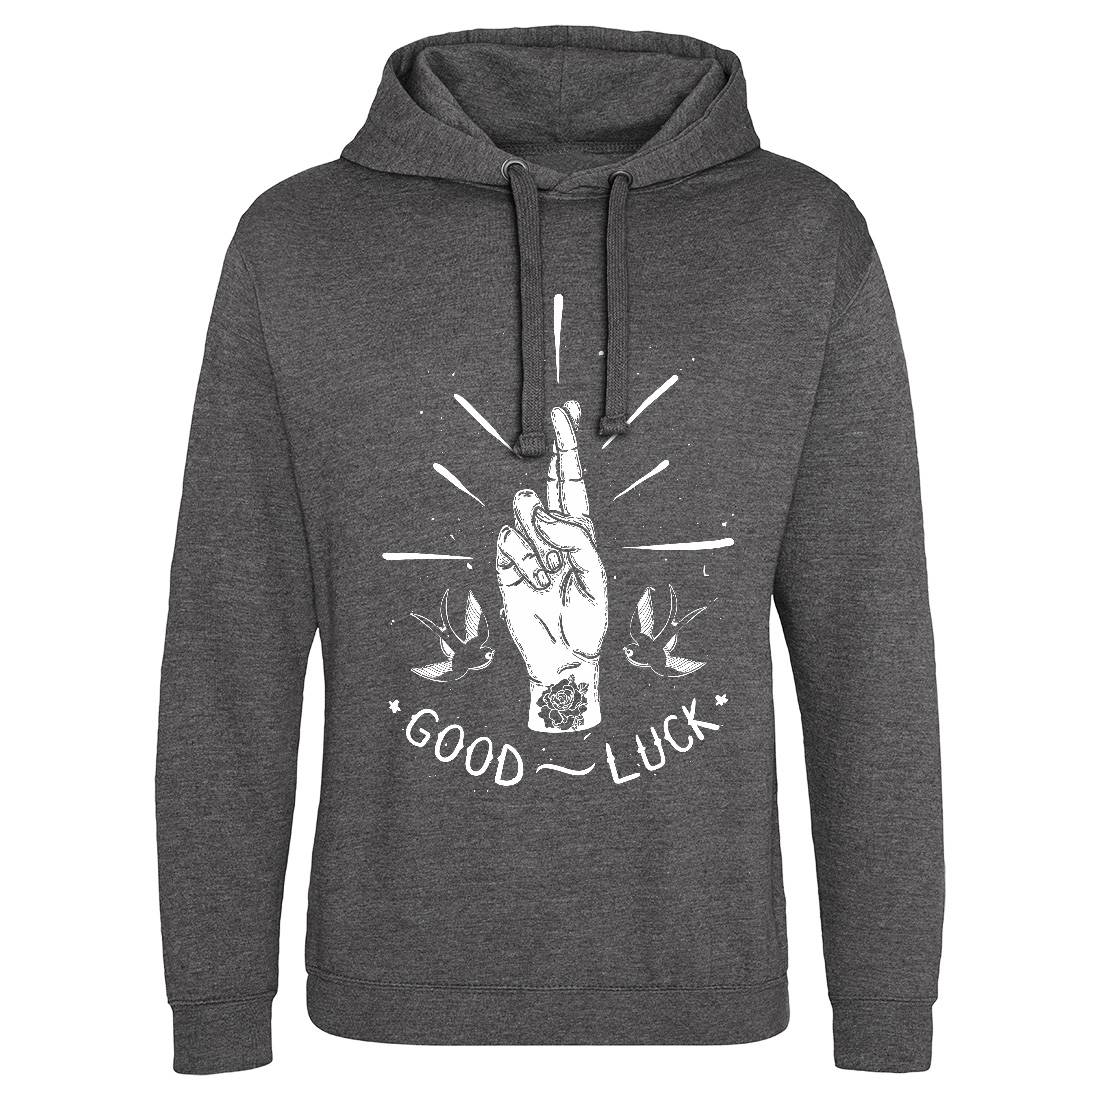 Good Luck Mens Hoodie Without Pocket Tattoo D461